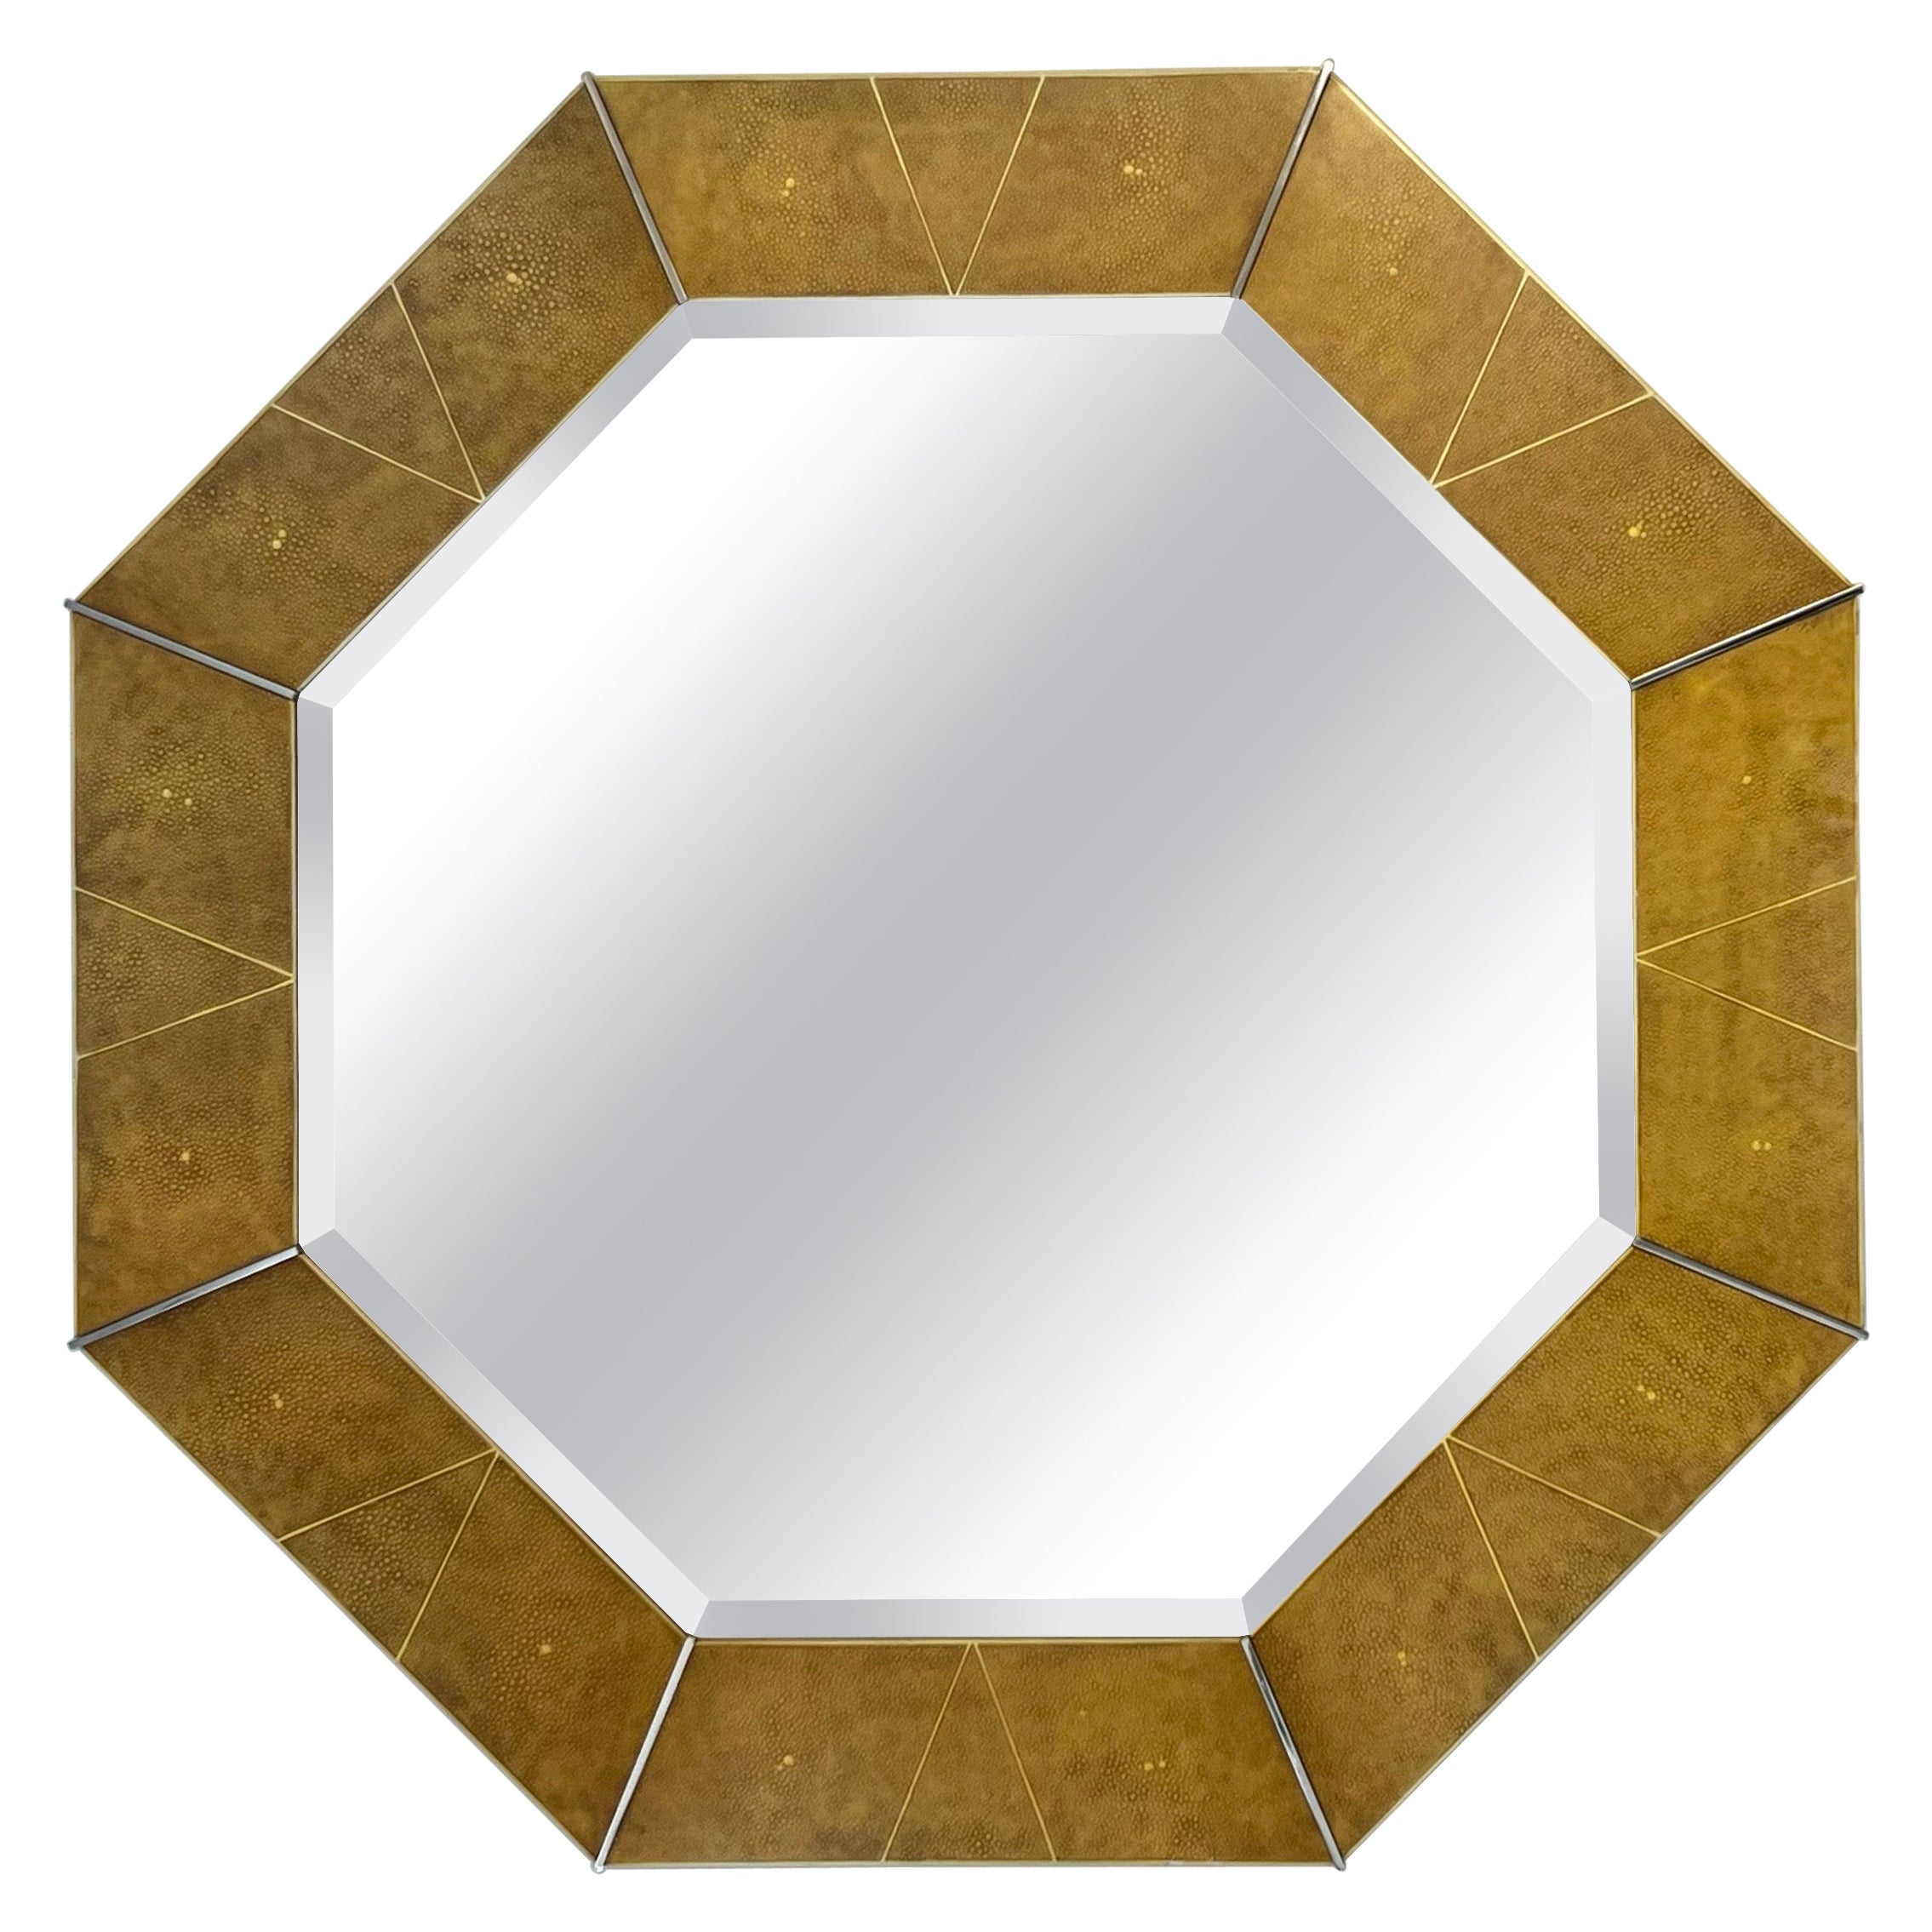 Octagonal Shagreen Lacquer and Chrome Mirror by Karl Springer for Suzanne Sumers